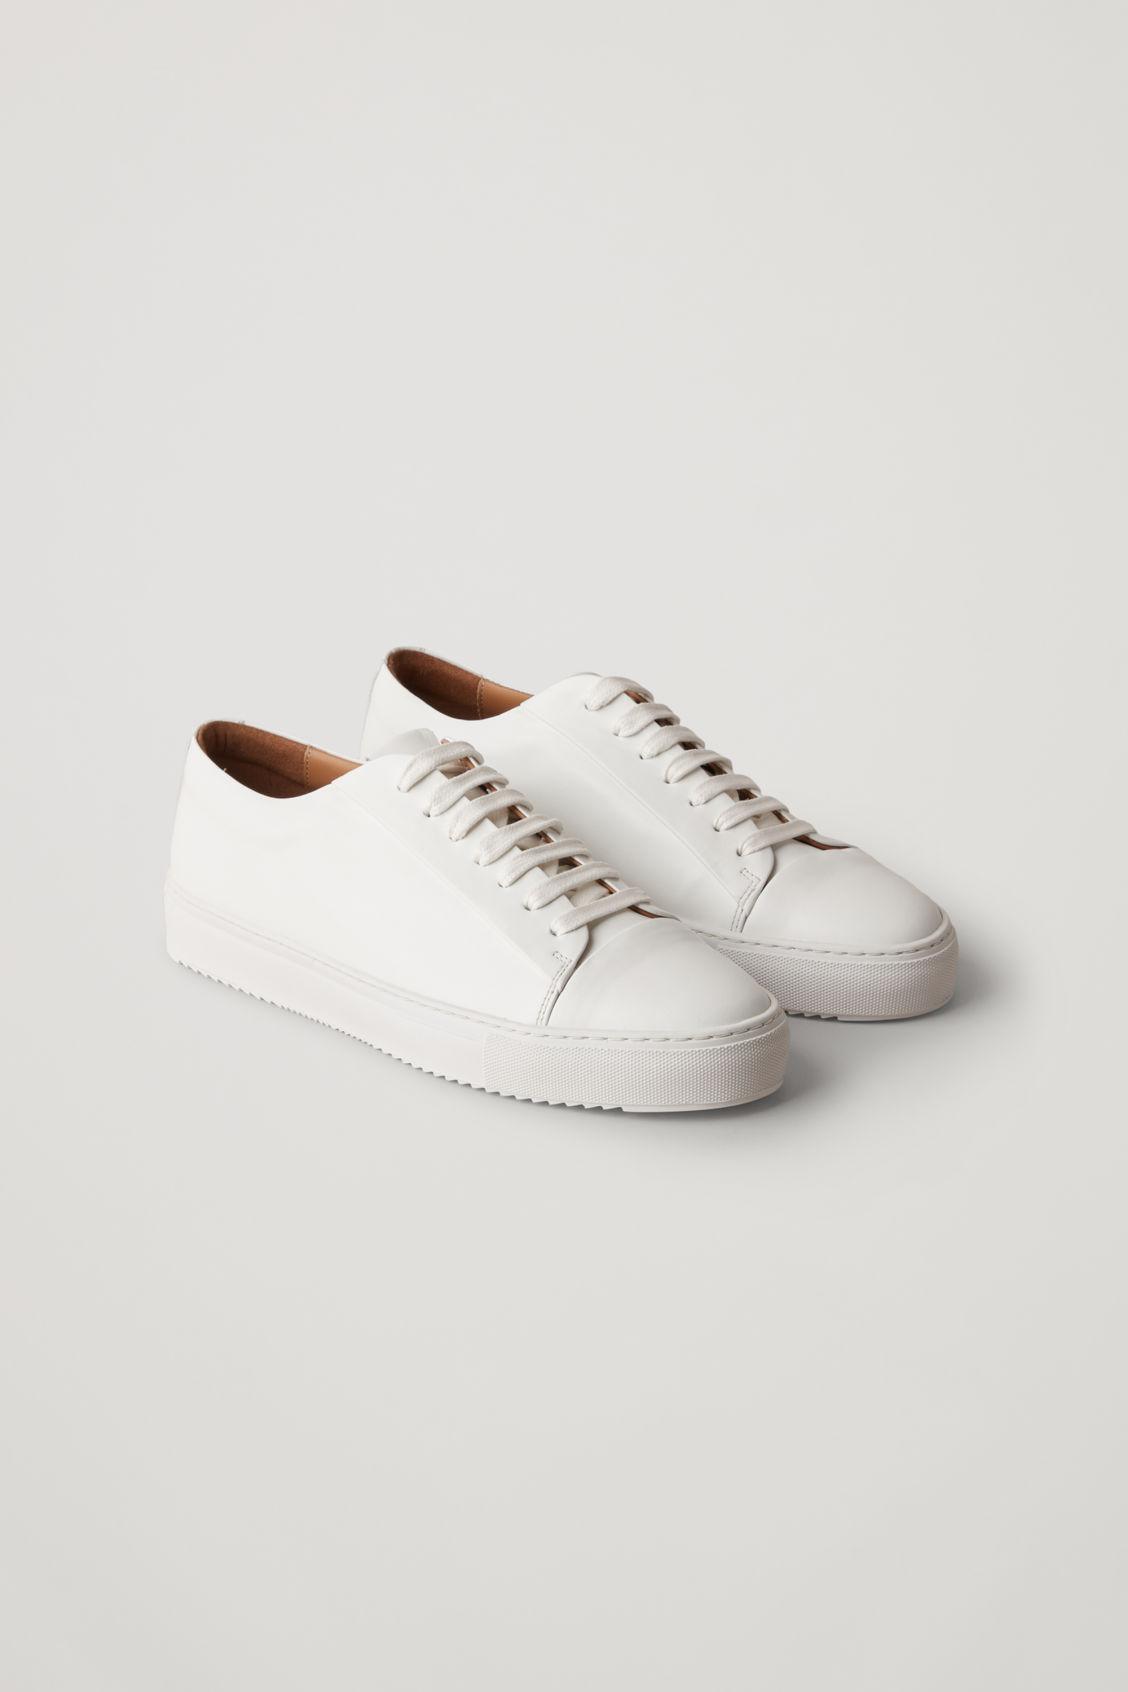 Ewell Minefelt græs COS Thick-soled Leather Sneakers in White for Men | Lyst